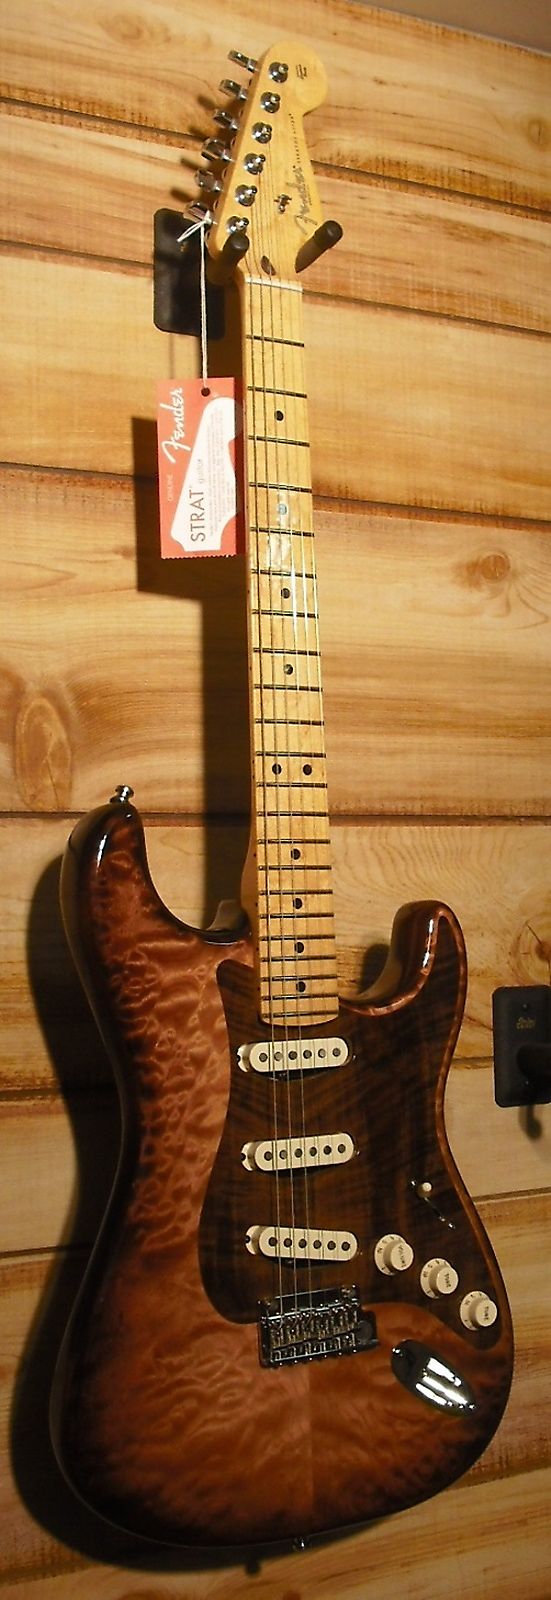 Limited Edition Fender Select Stratocaster Inlaid Pickguard